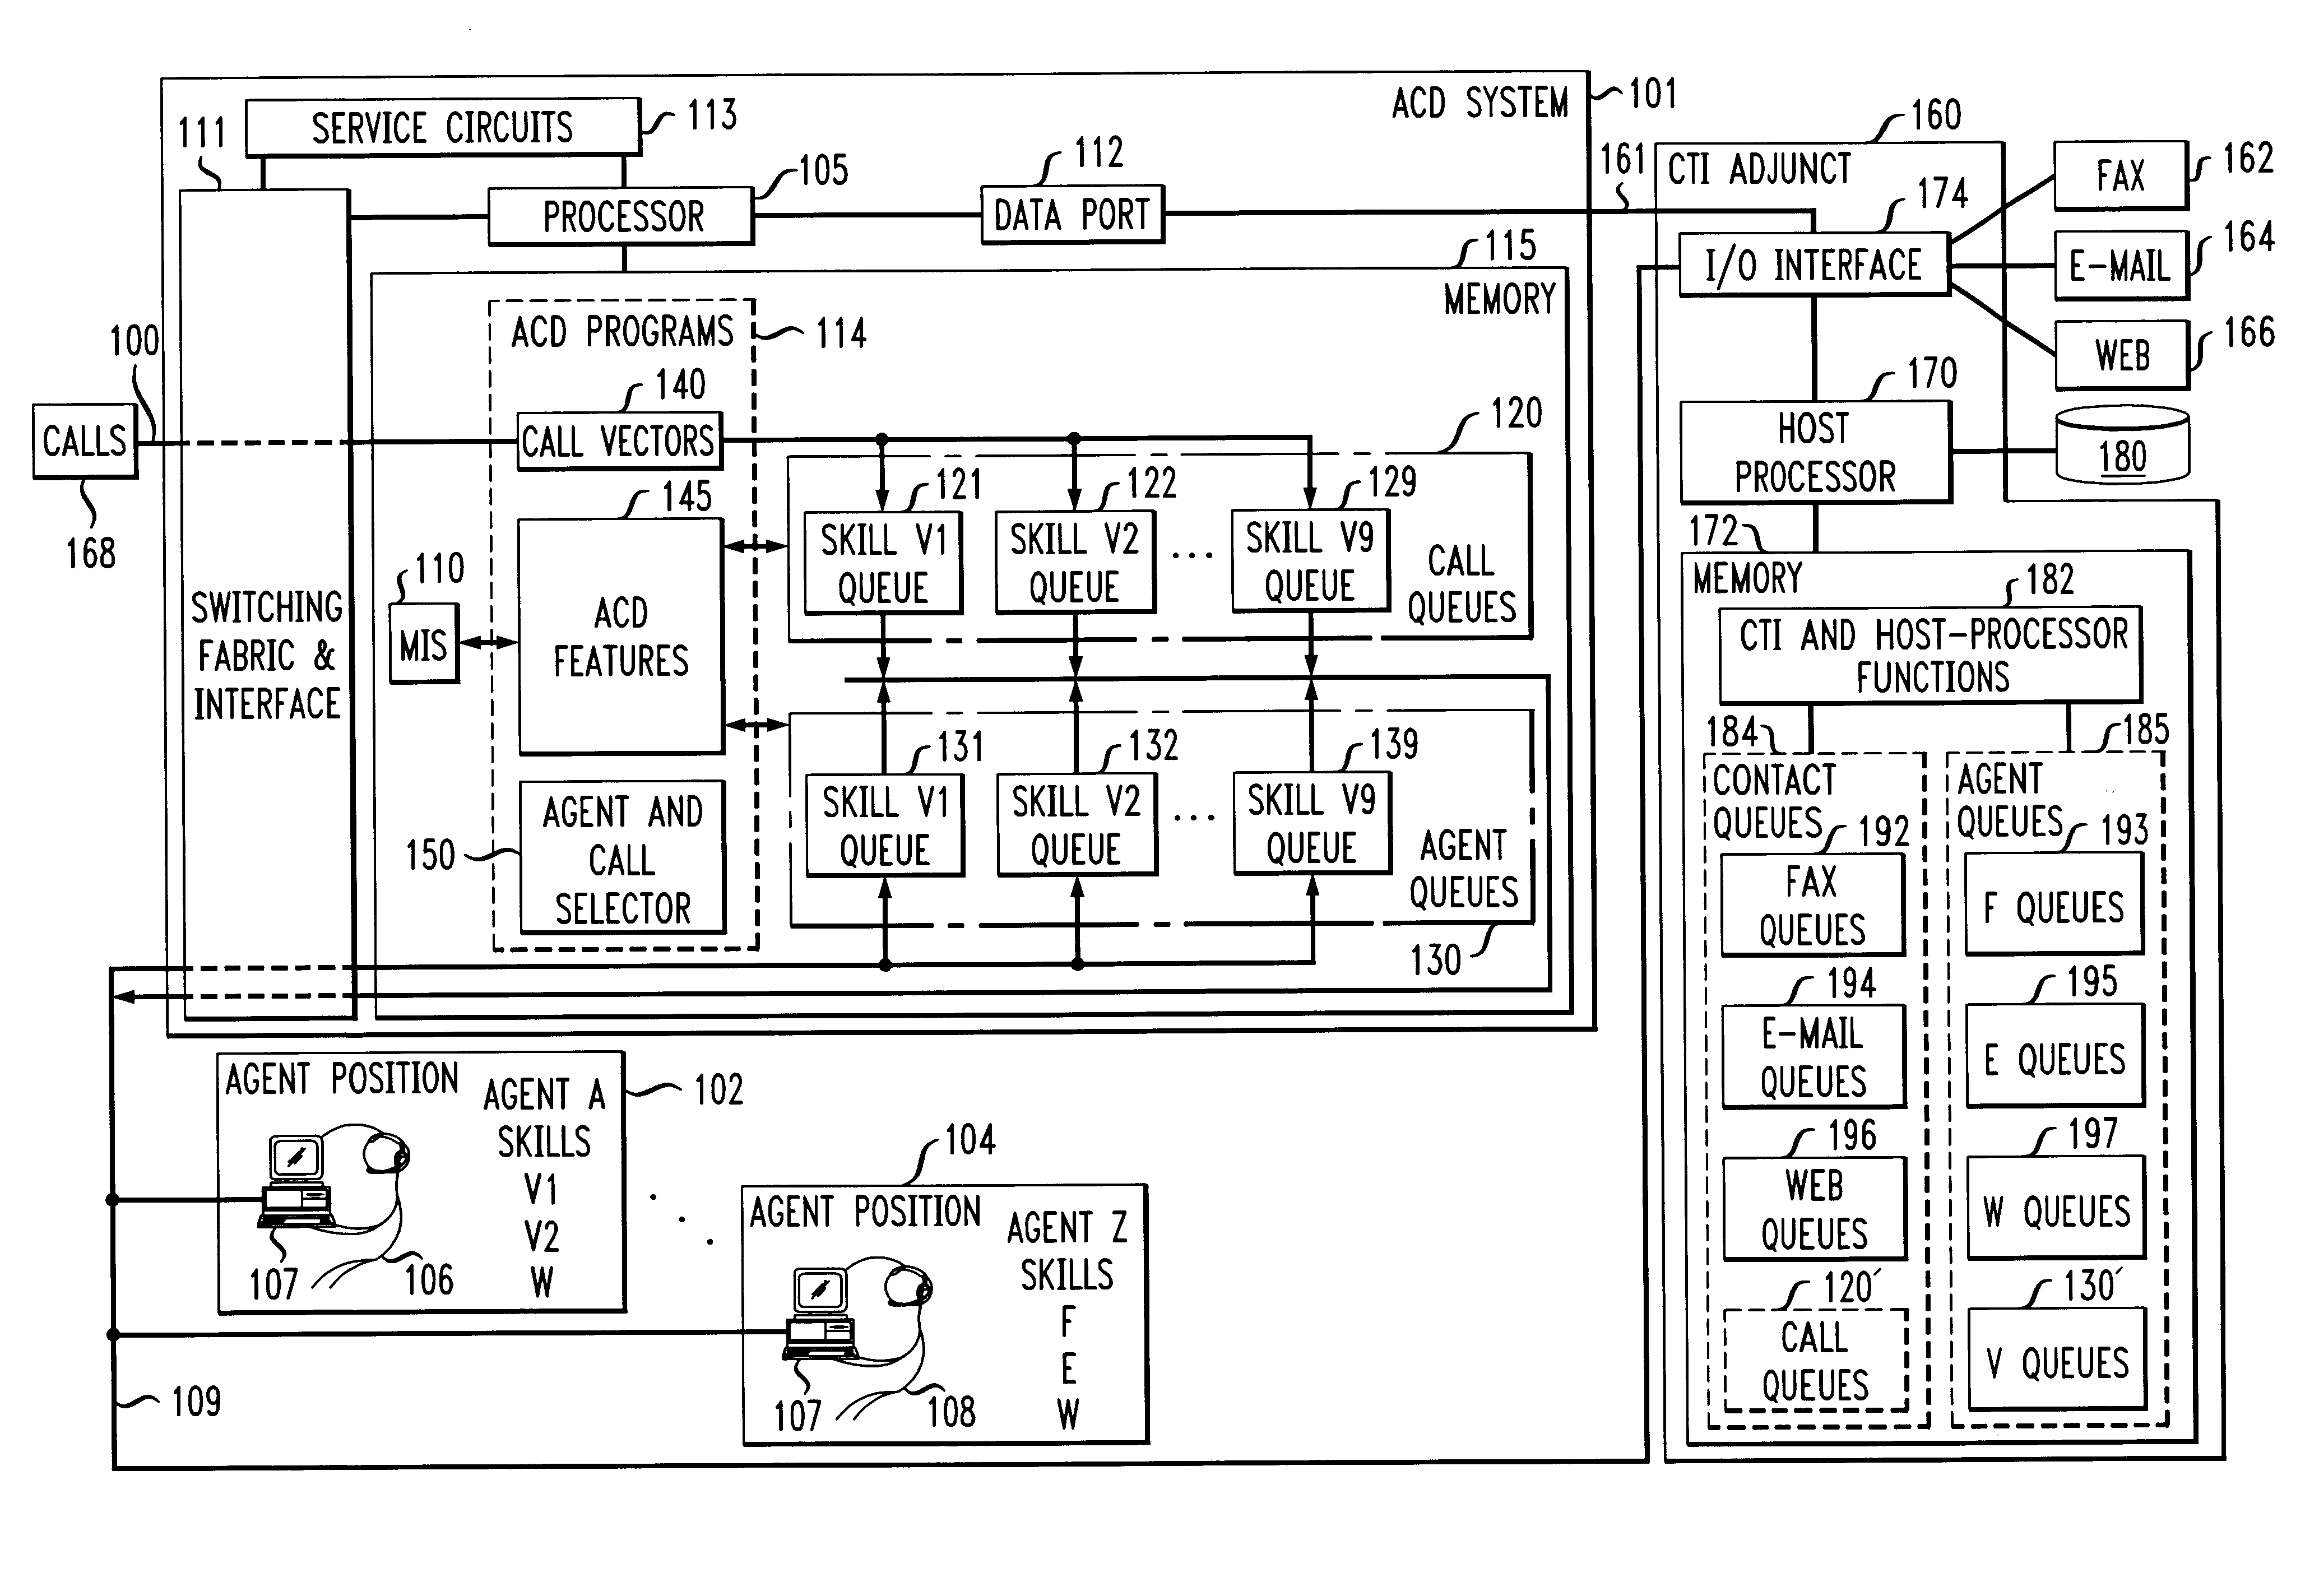 Computer-telephony integration that uses features of an automatic call distribution system